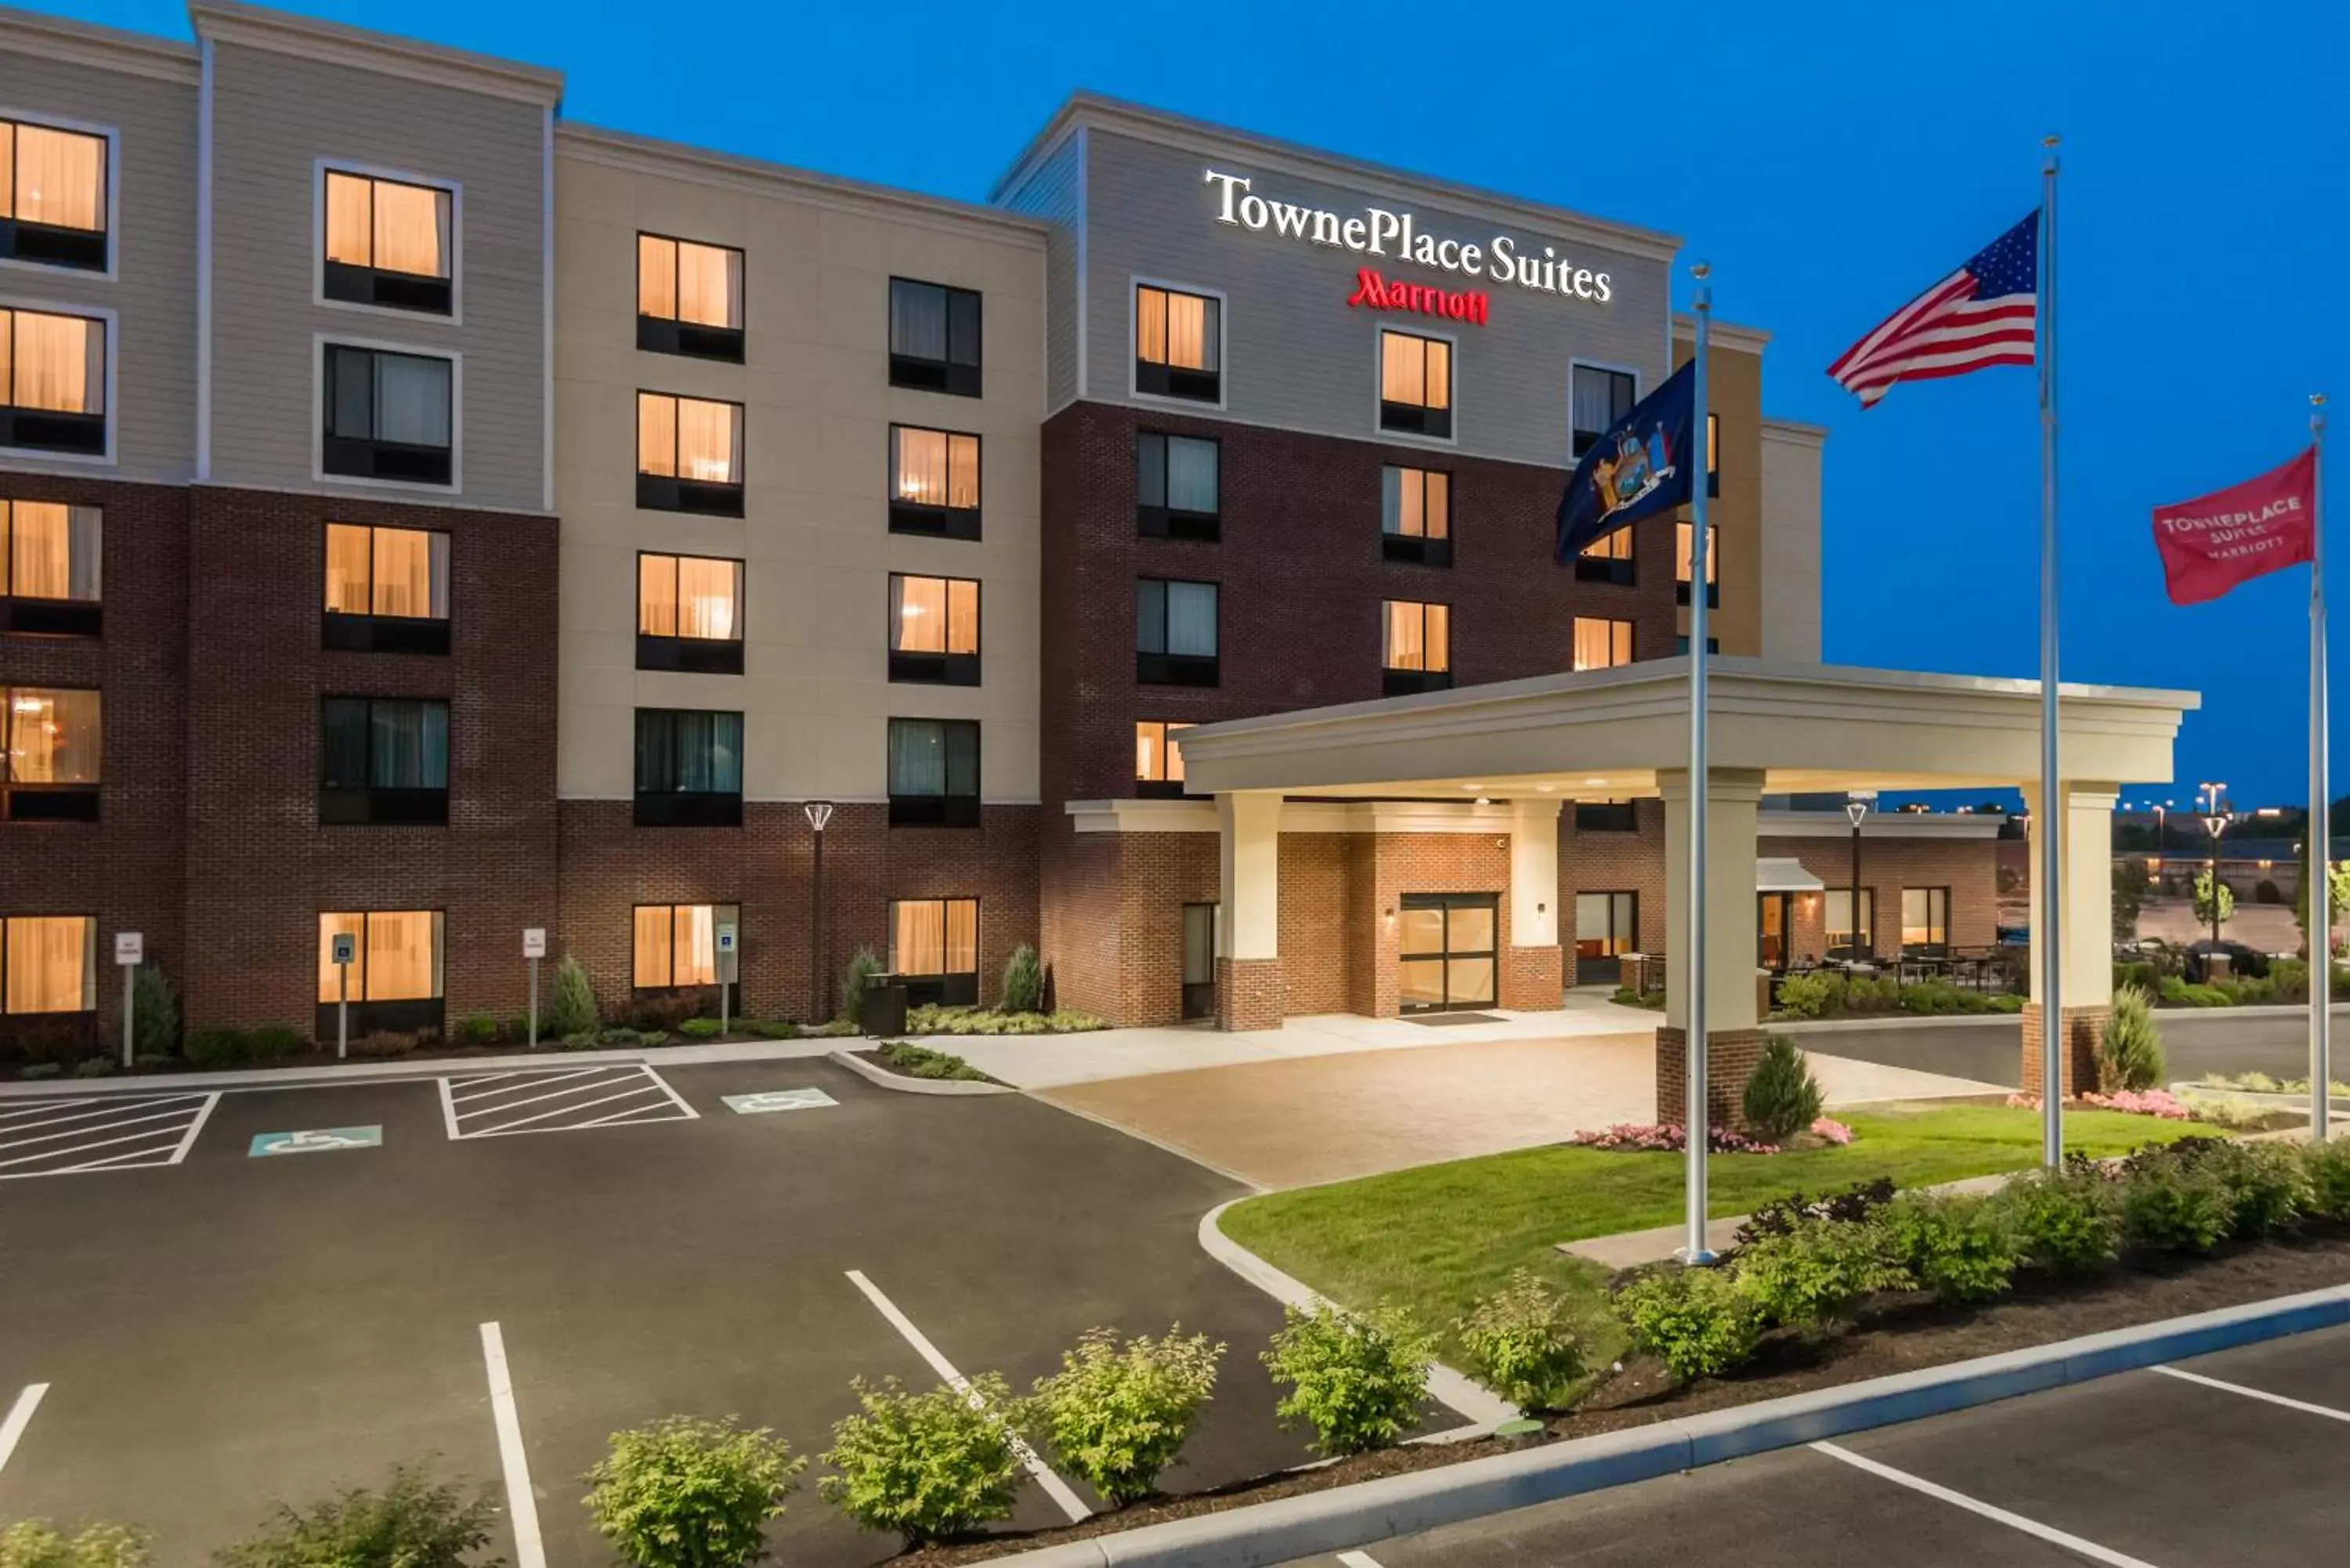 Property Building in TownePlace Suites by Marriott Latham Albany Airport